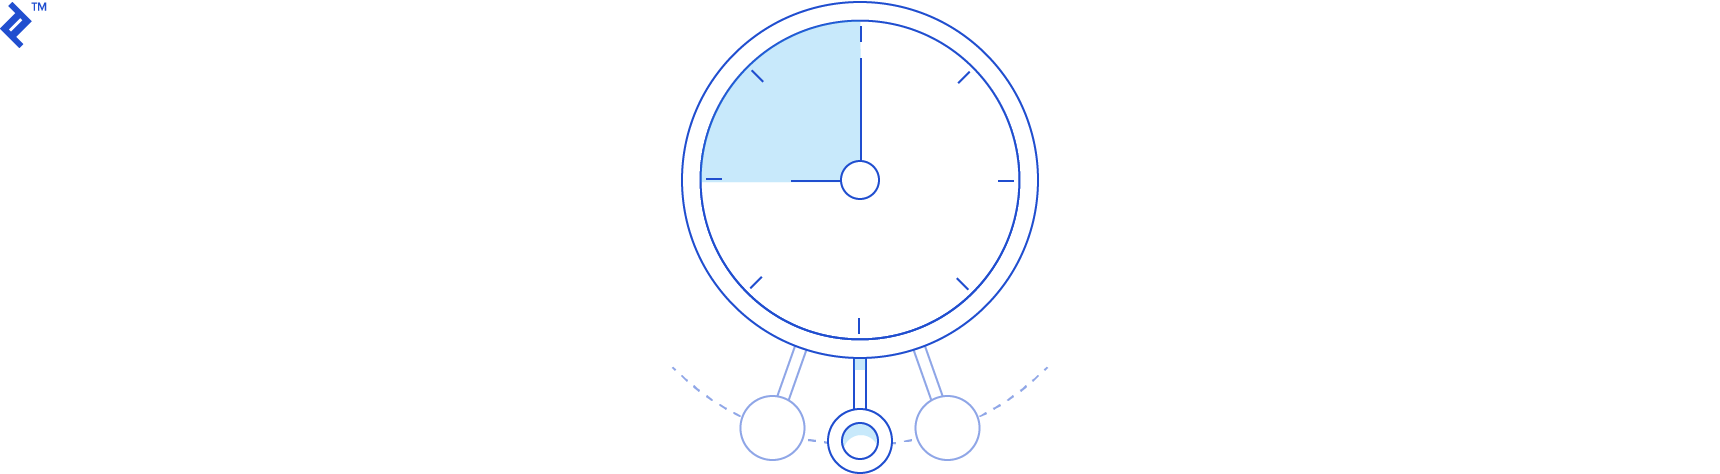 Abstract diagram of a compass pointing towards the direction of "business goals"